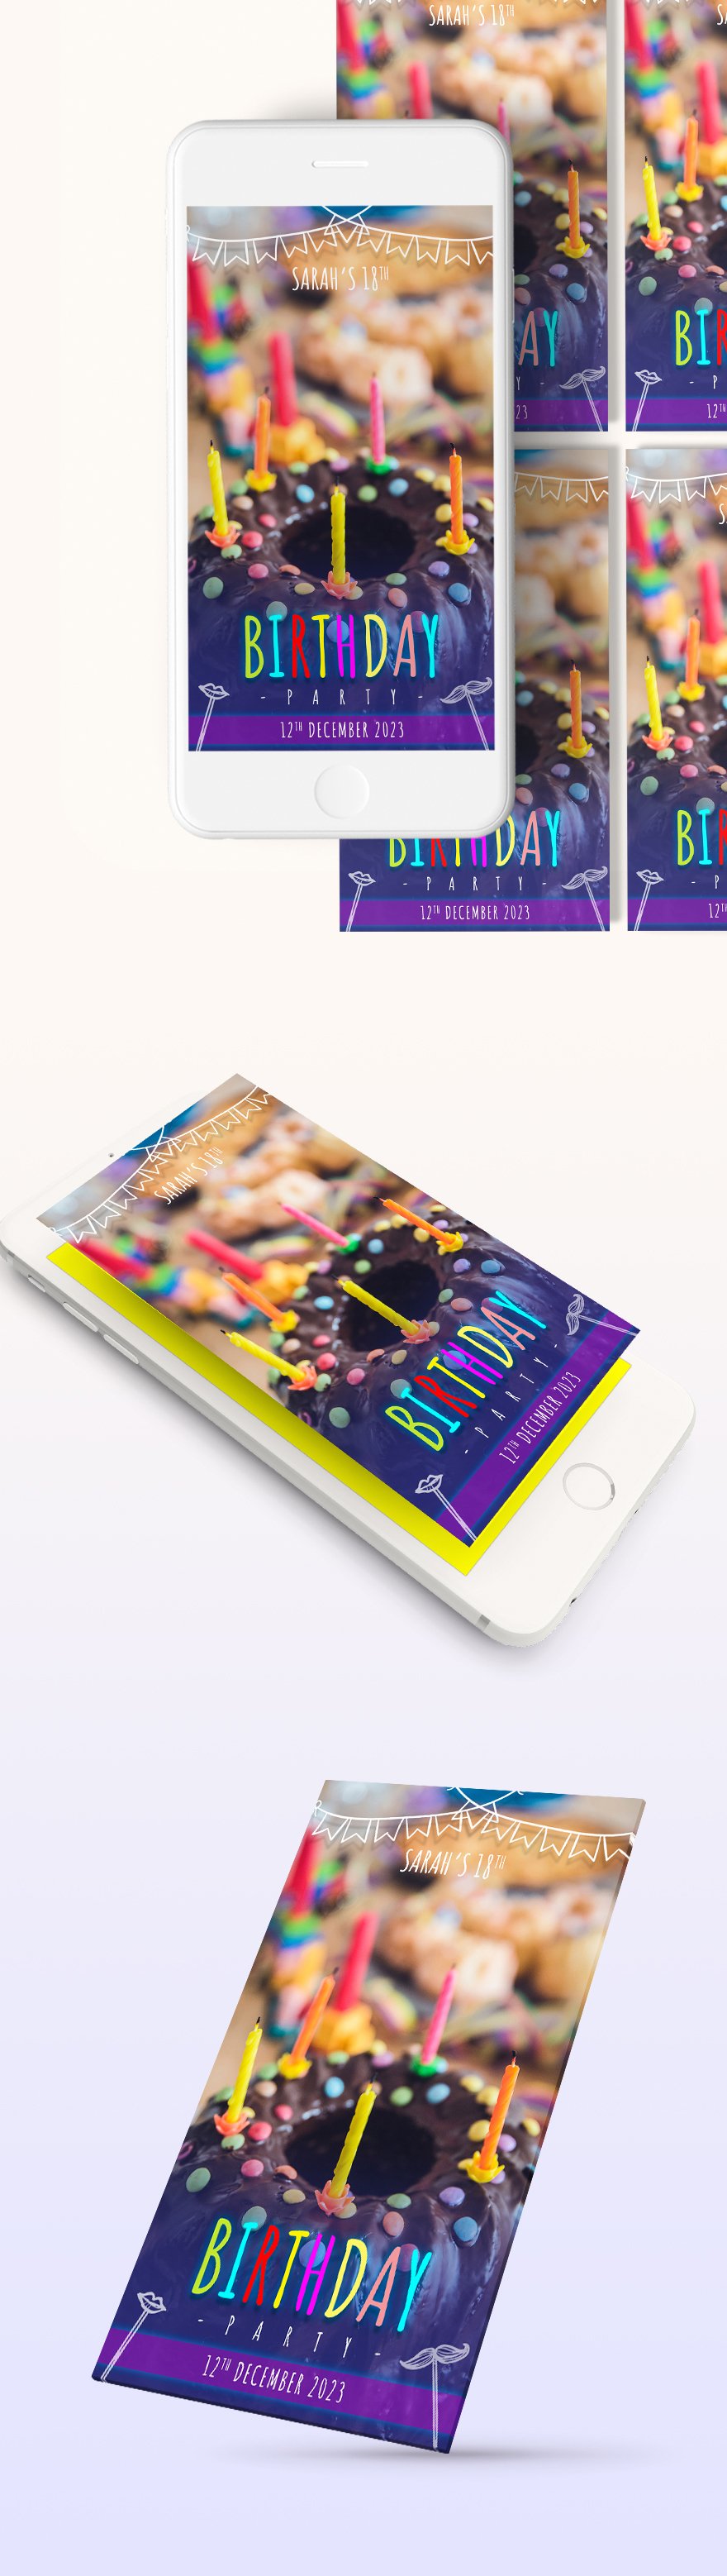 Birthday Party Snapchat Geofilters Template